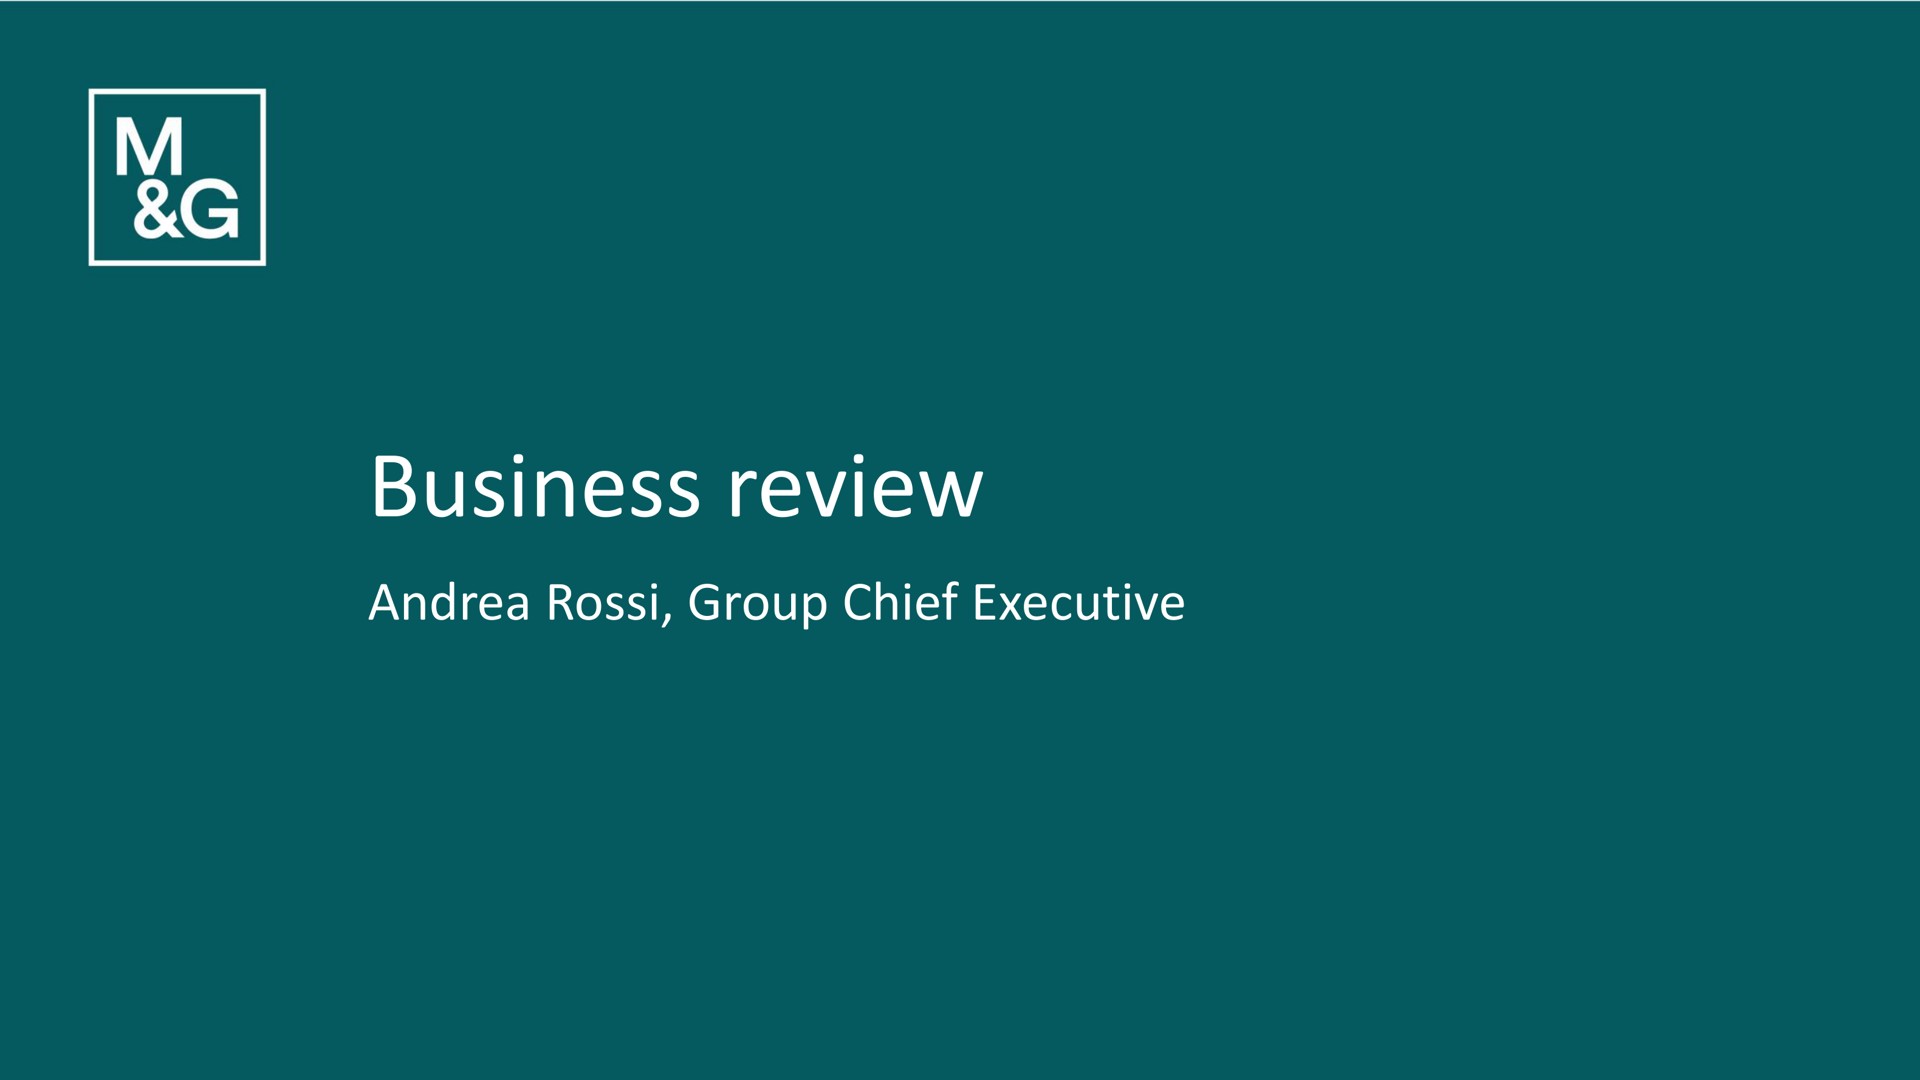 business review group chief executive | M&G